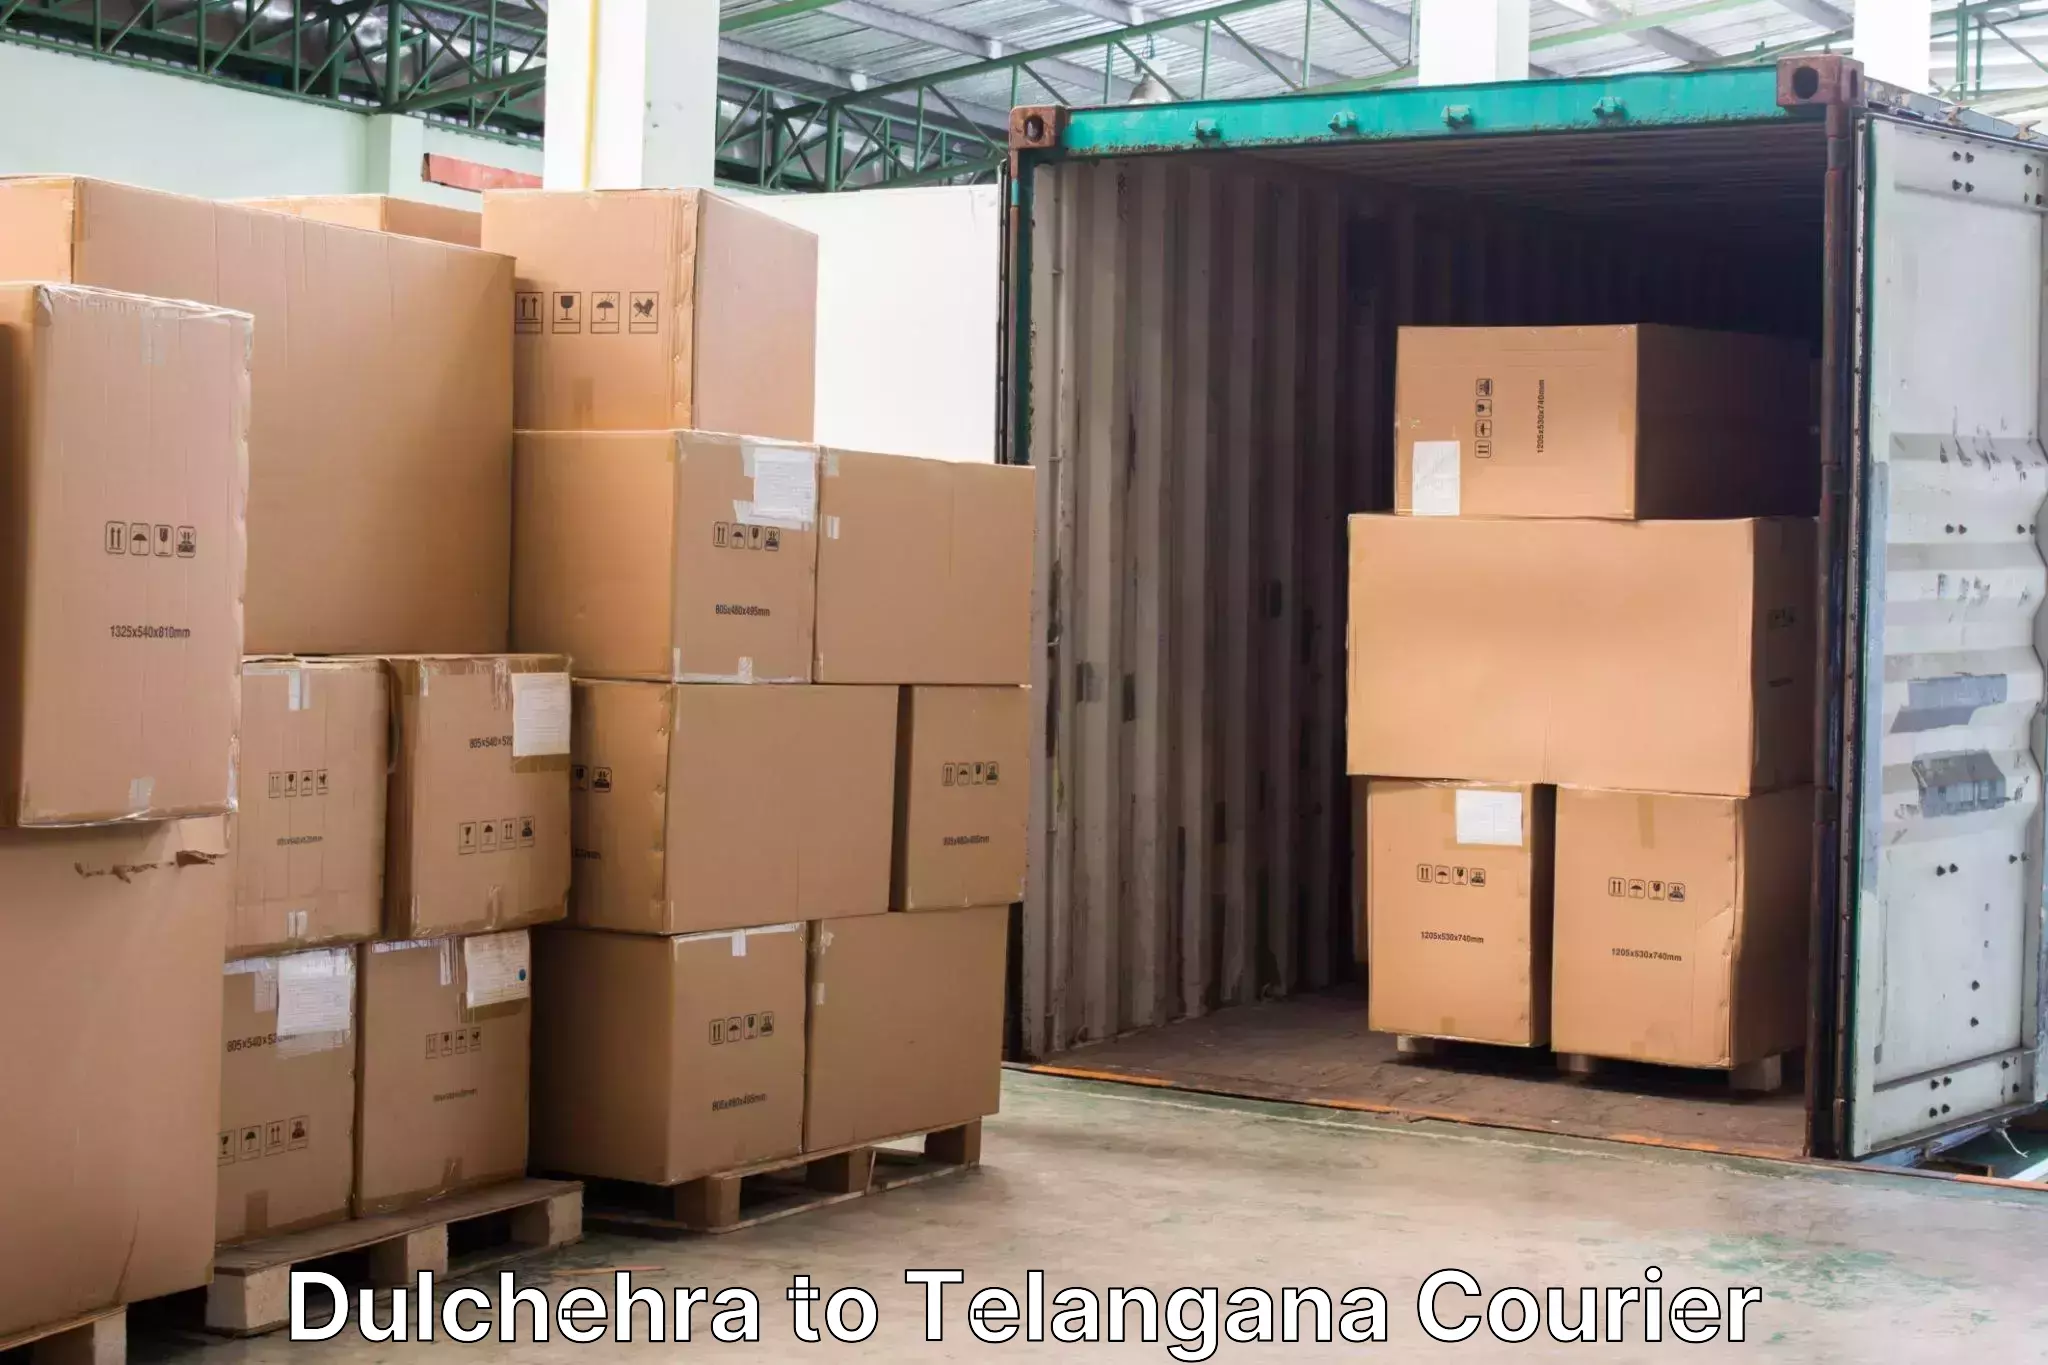 Luggage shipment tracking Dulchehra to Luxettipet